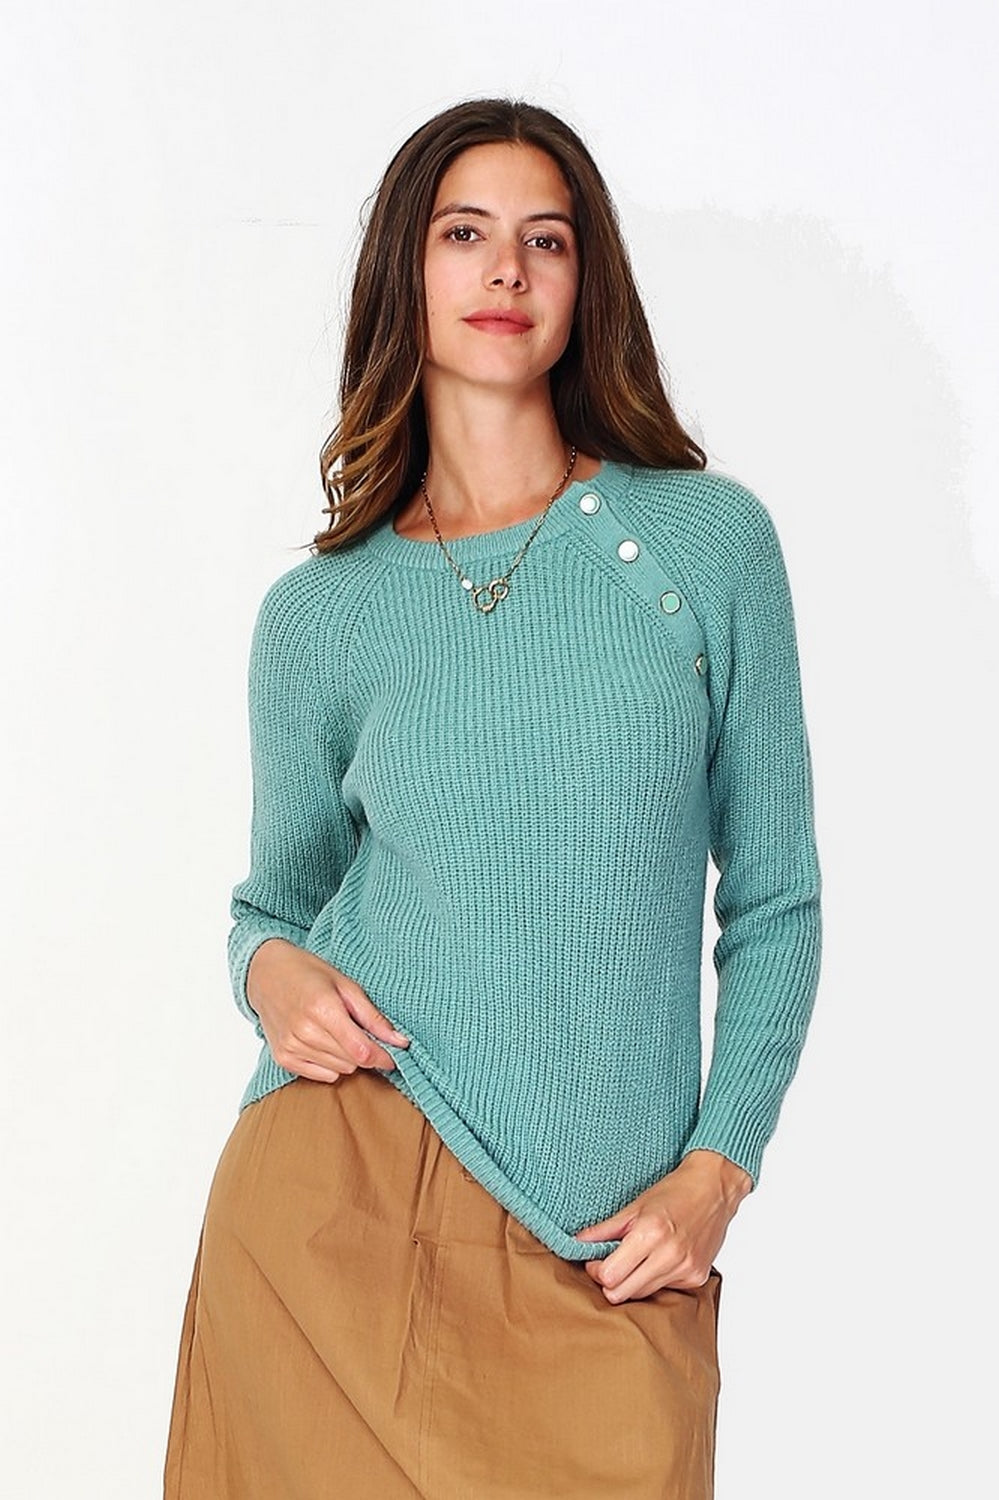 High neck sweater closed by a shoulder button placket, pearl rib knitting